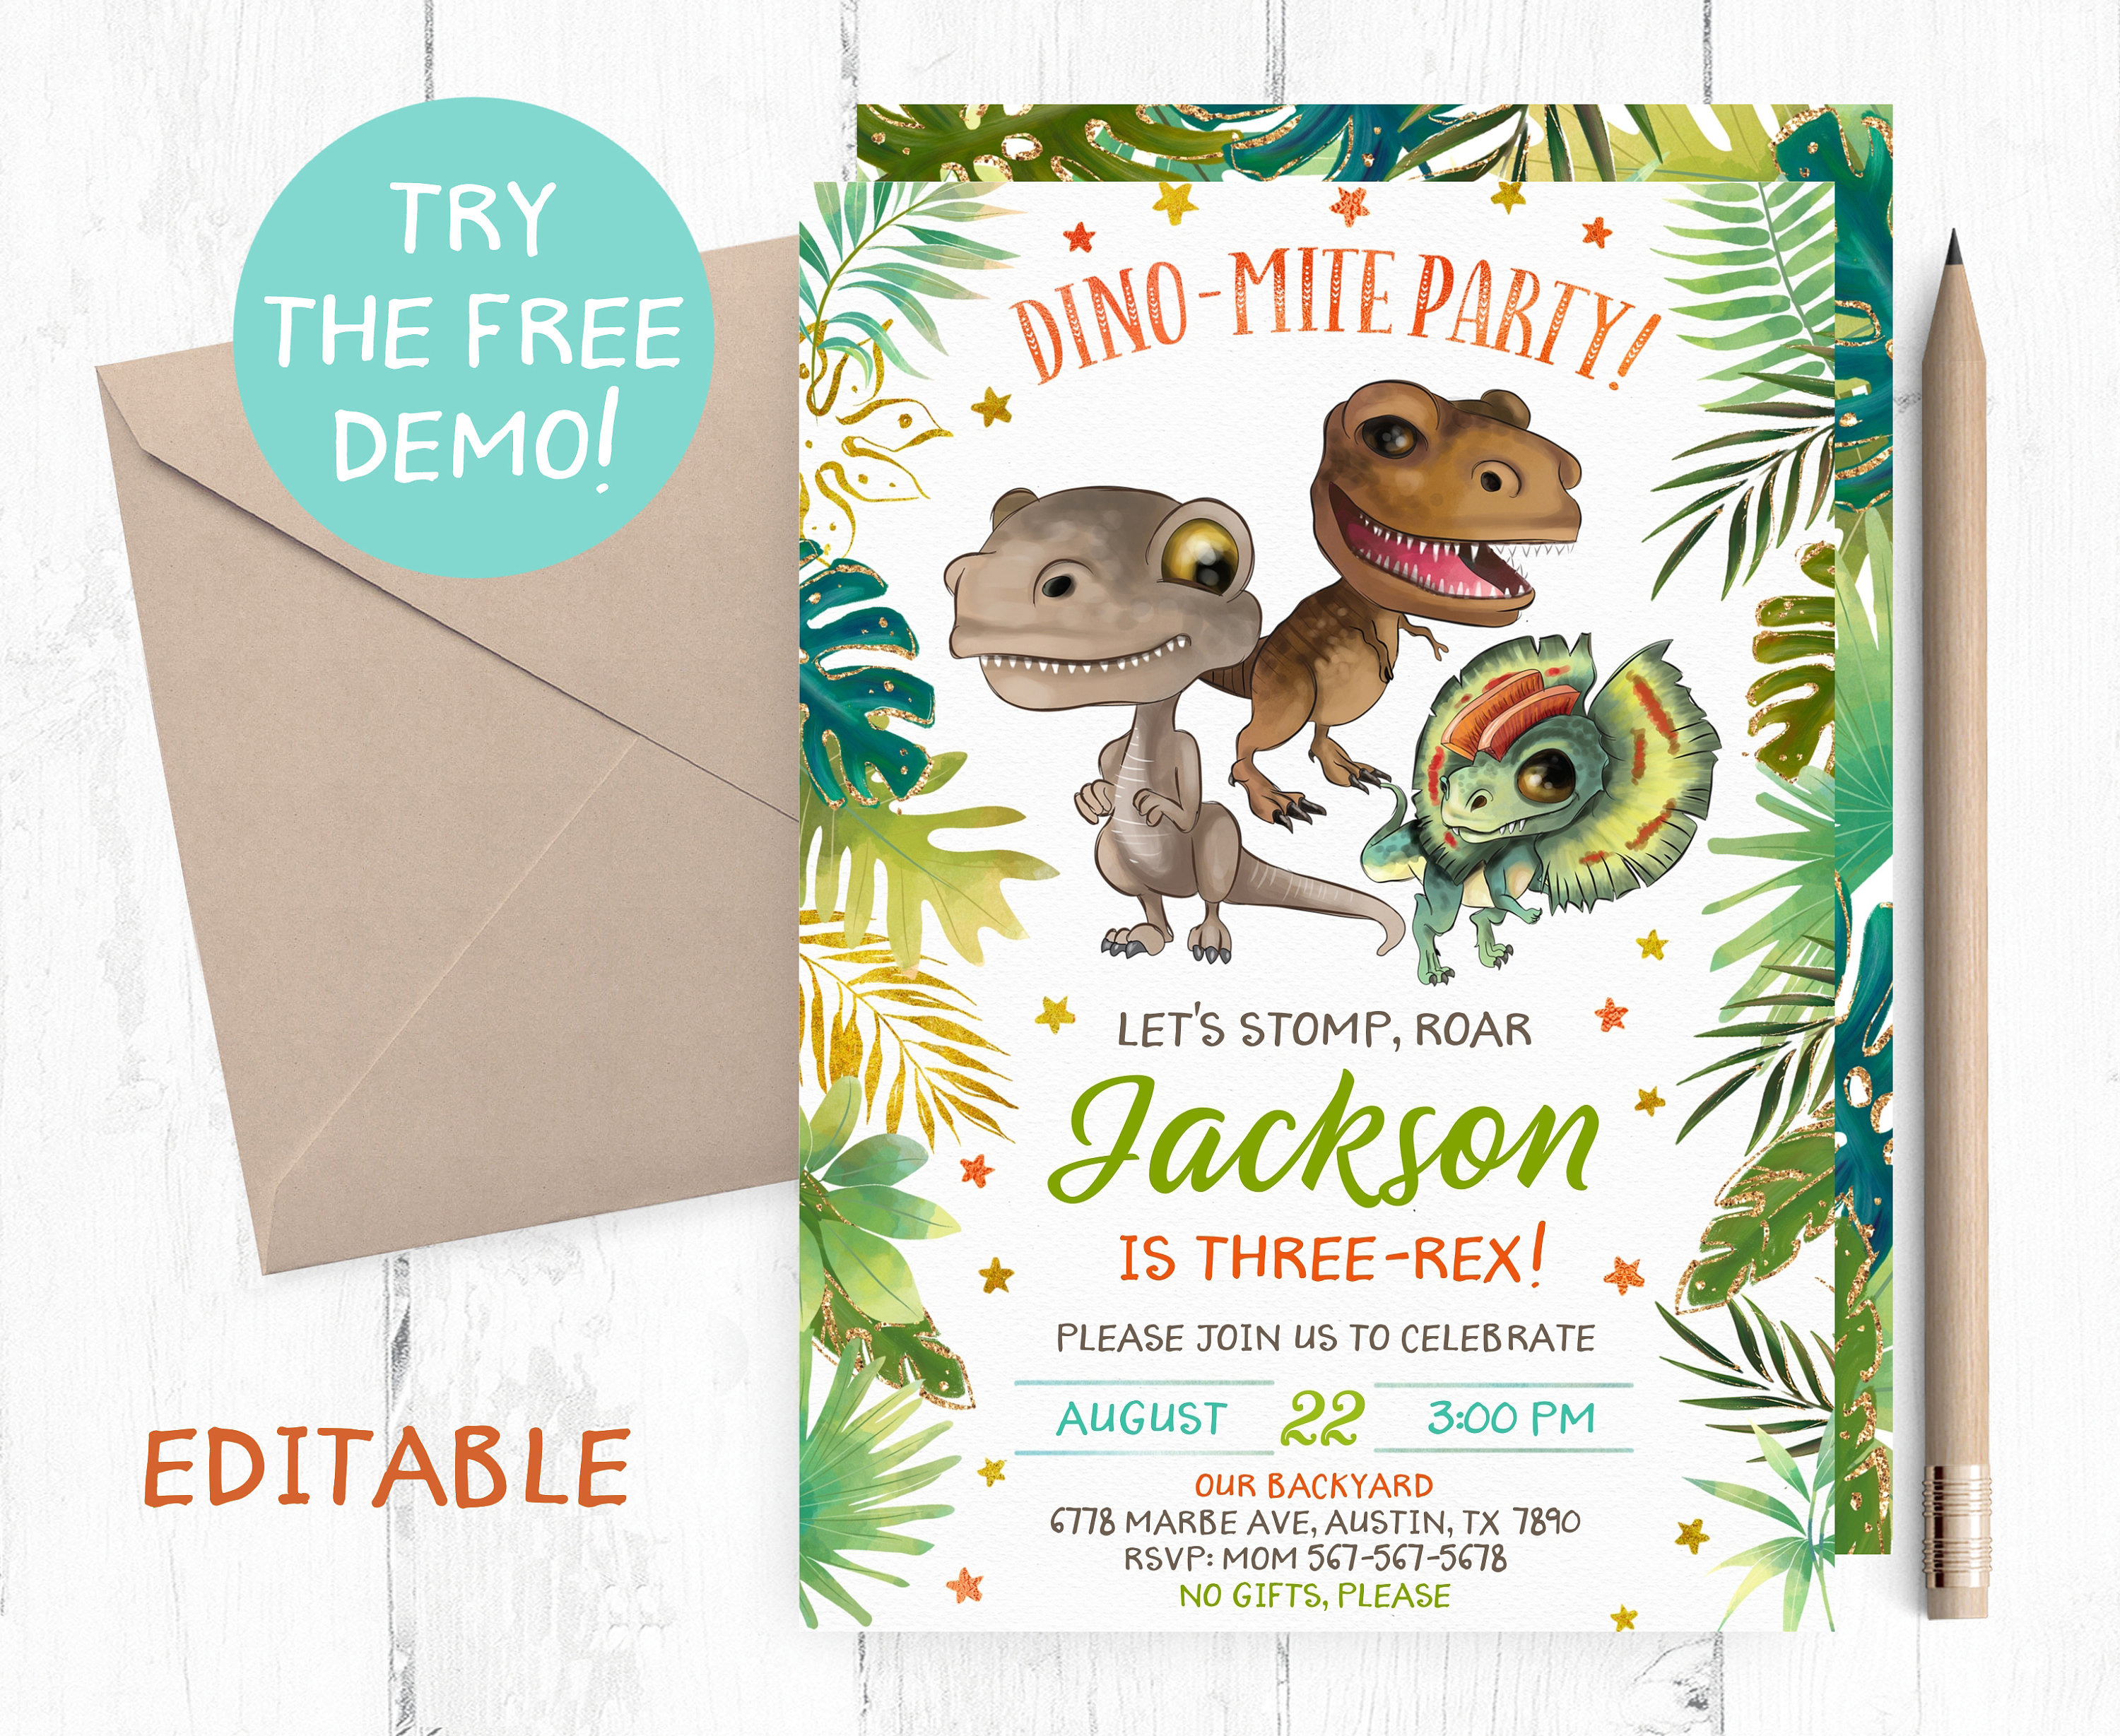 Dino-MITE Dinosaurs & Reptiles Birthday Party // Hostess with the Mostess®